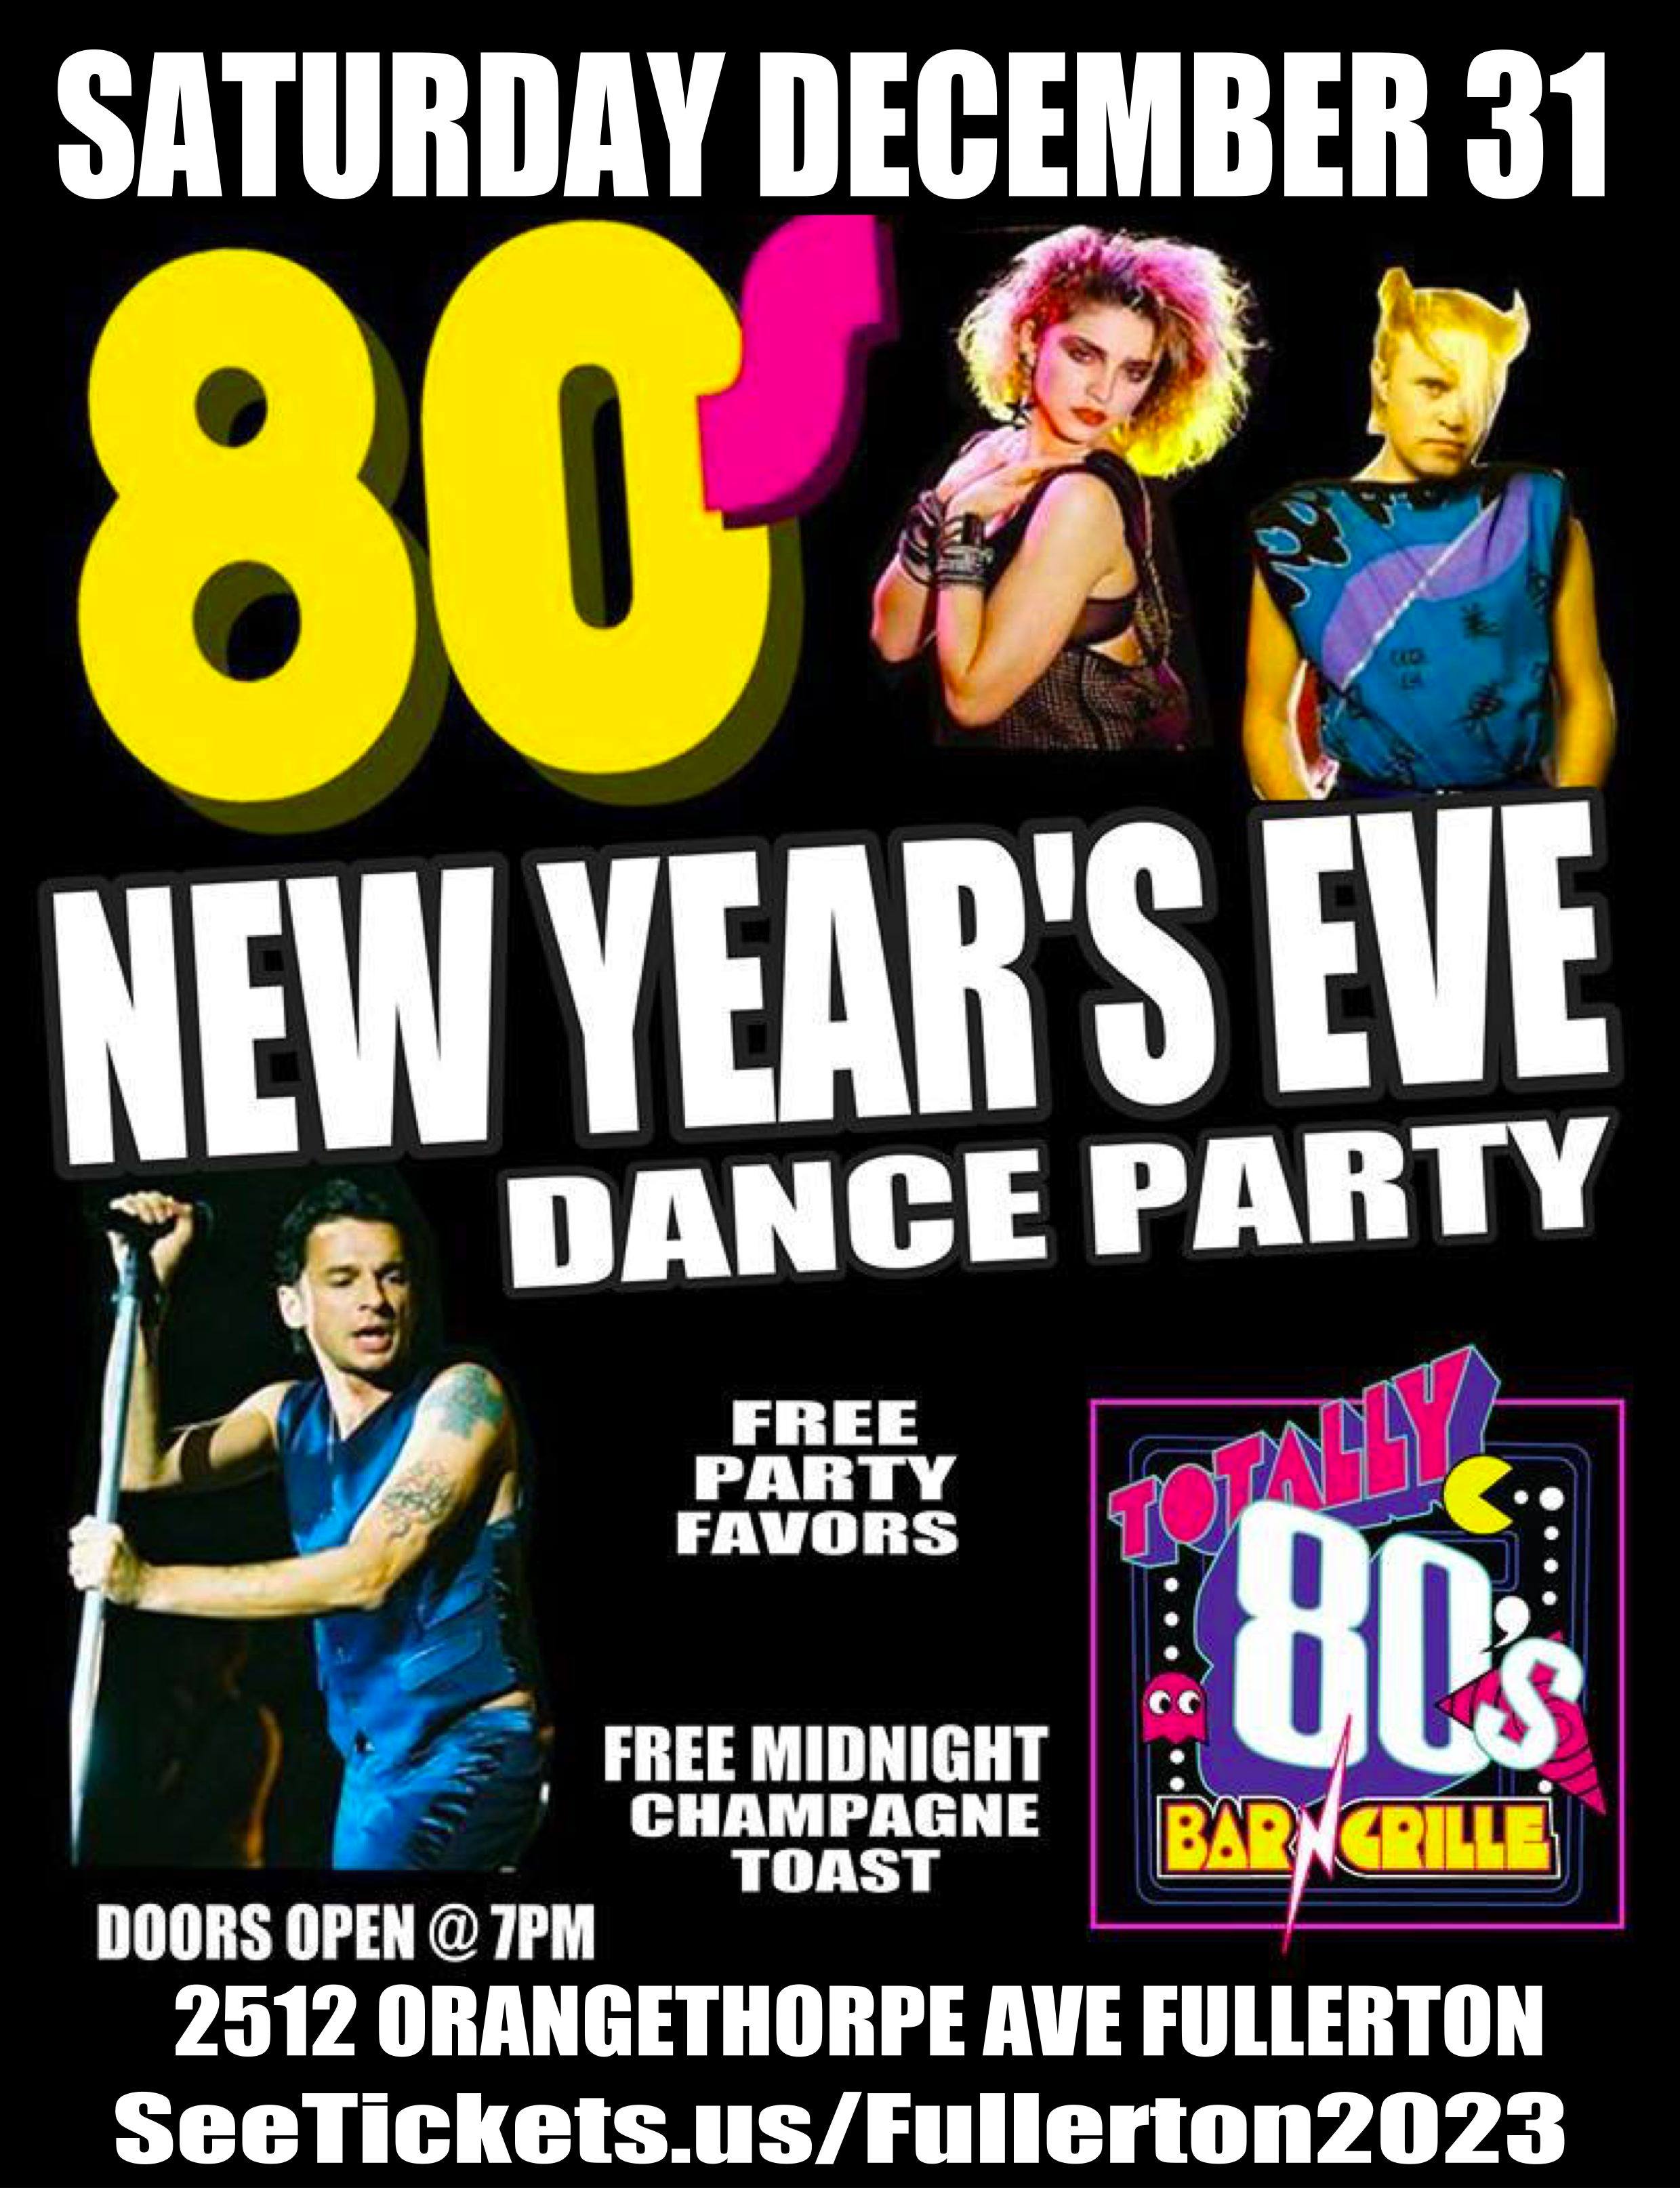 Buy Tickets To Totally 80s Bar New Years Eve In Fullerton On Dec 31 2022 